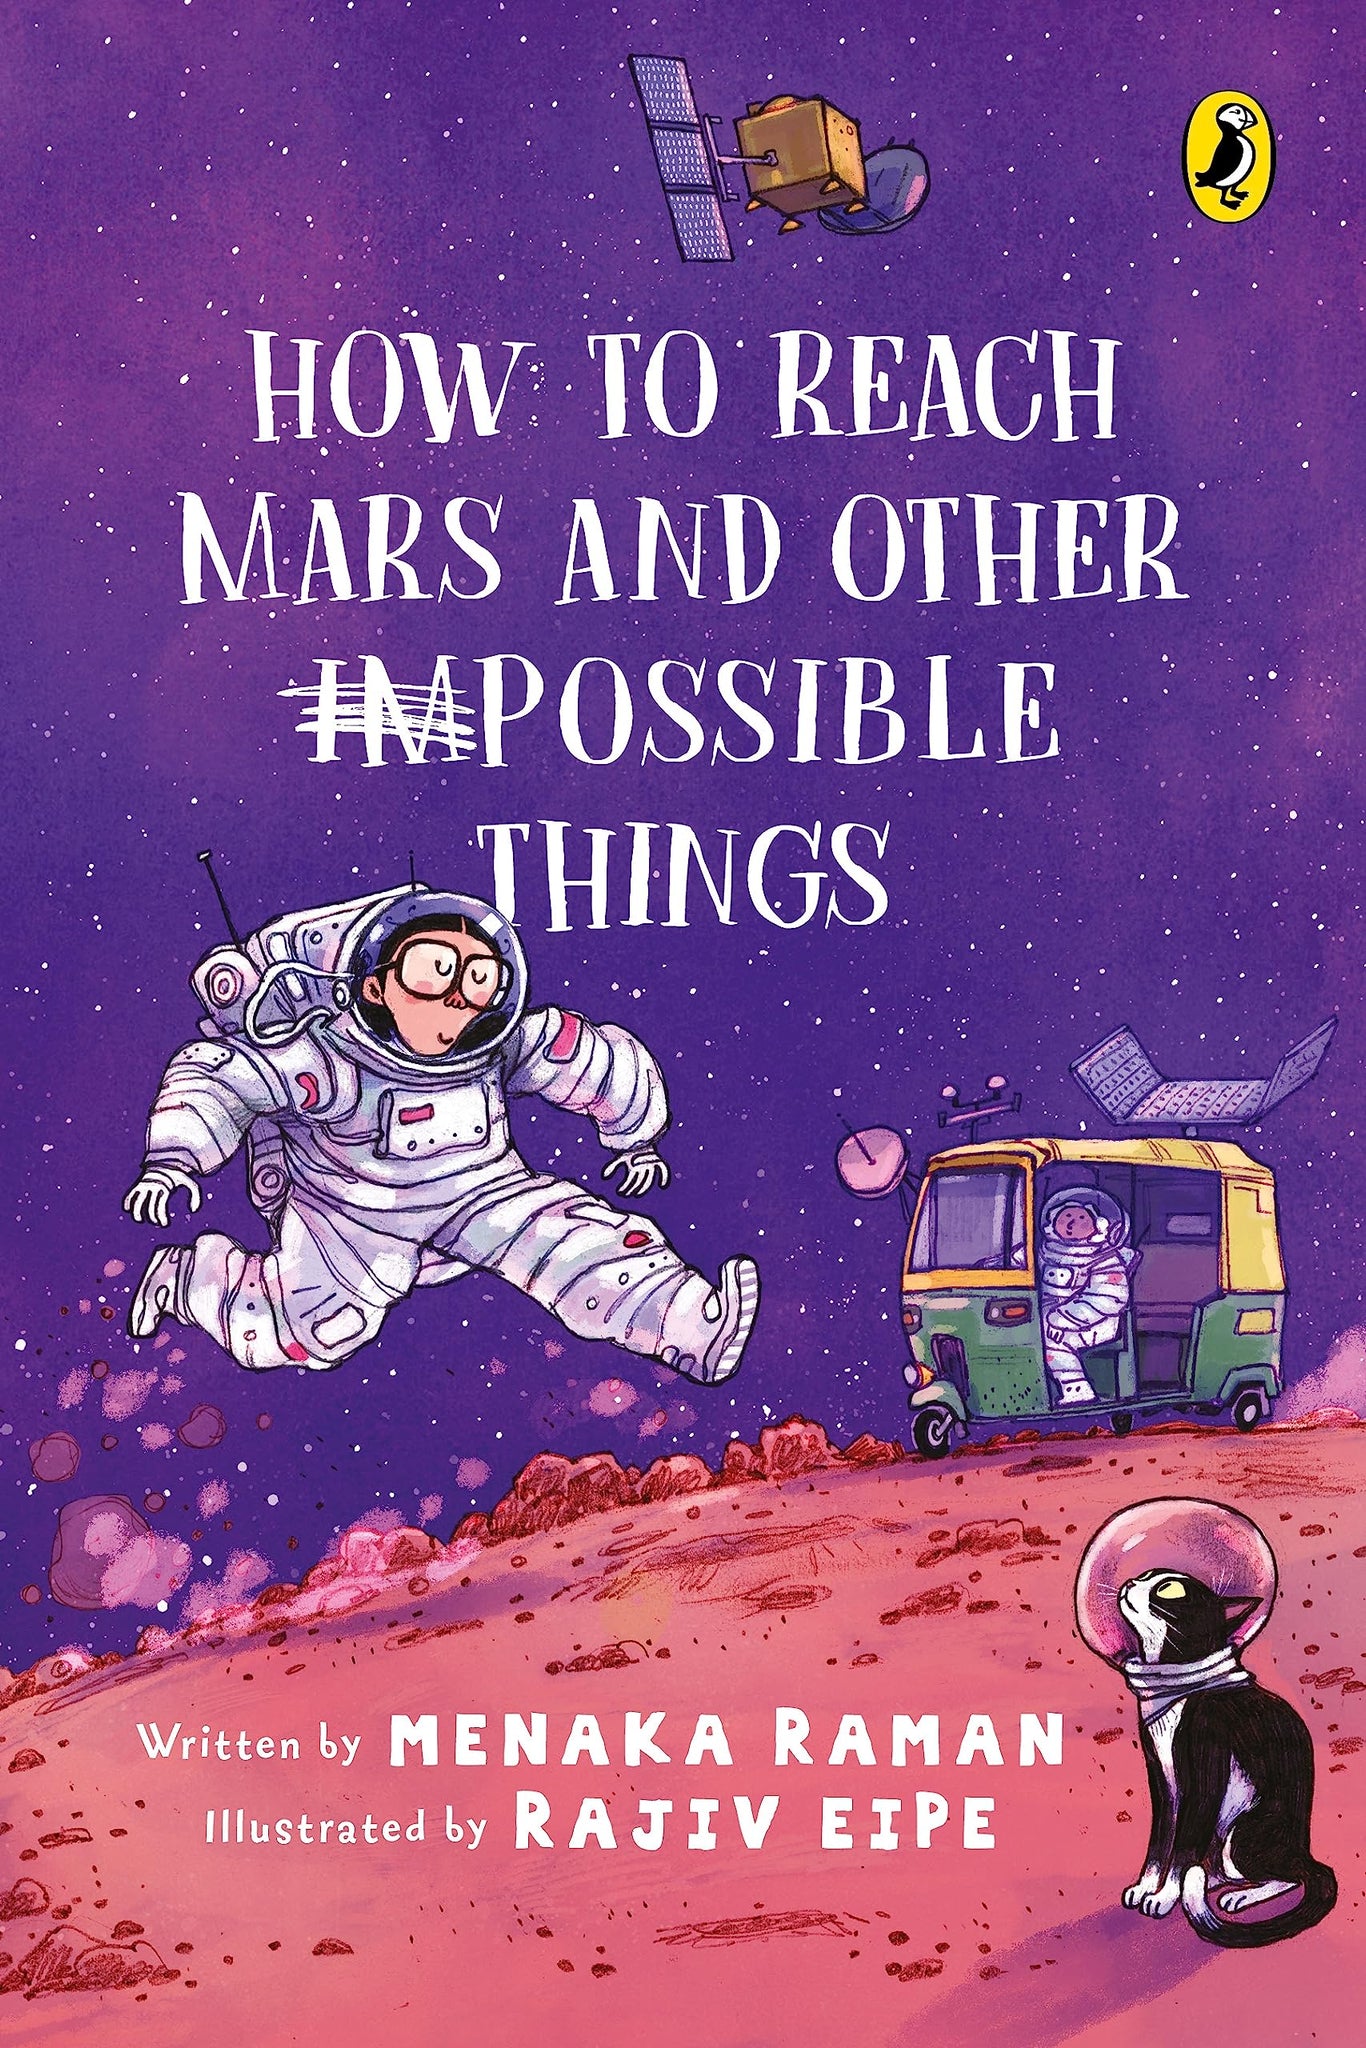 How to Reach Mars and Other Impossible Things